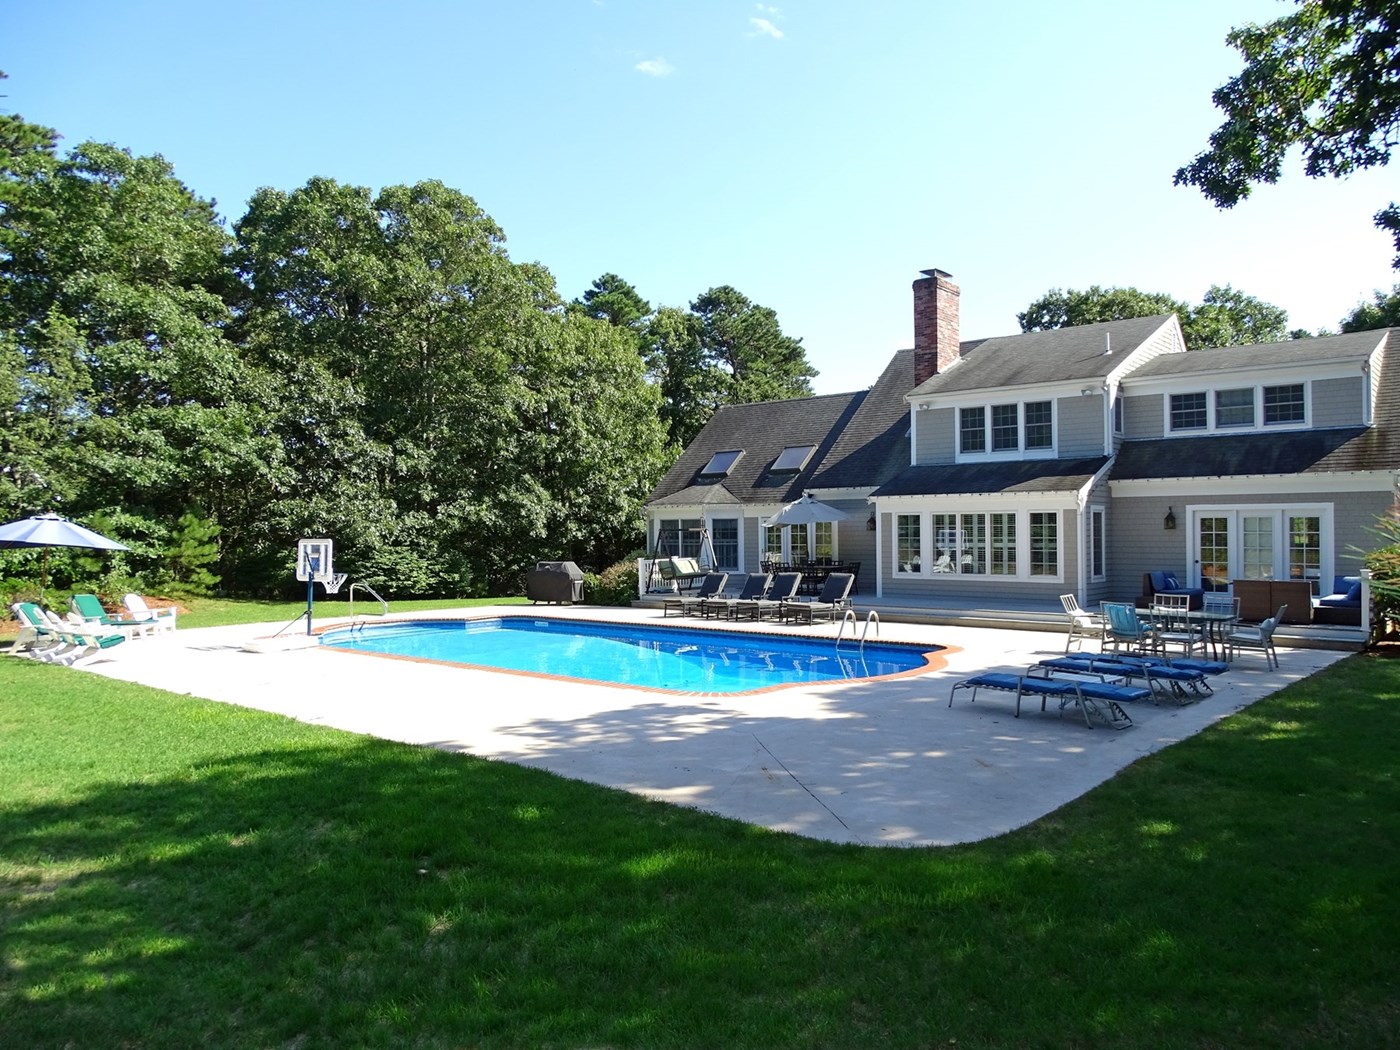 On Cape Cod, why are so many vacation rentals empty?